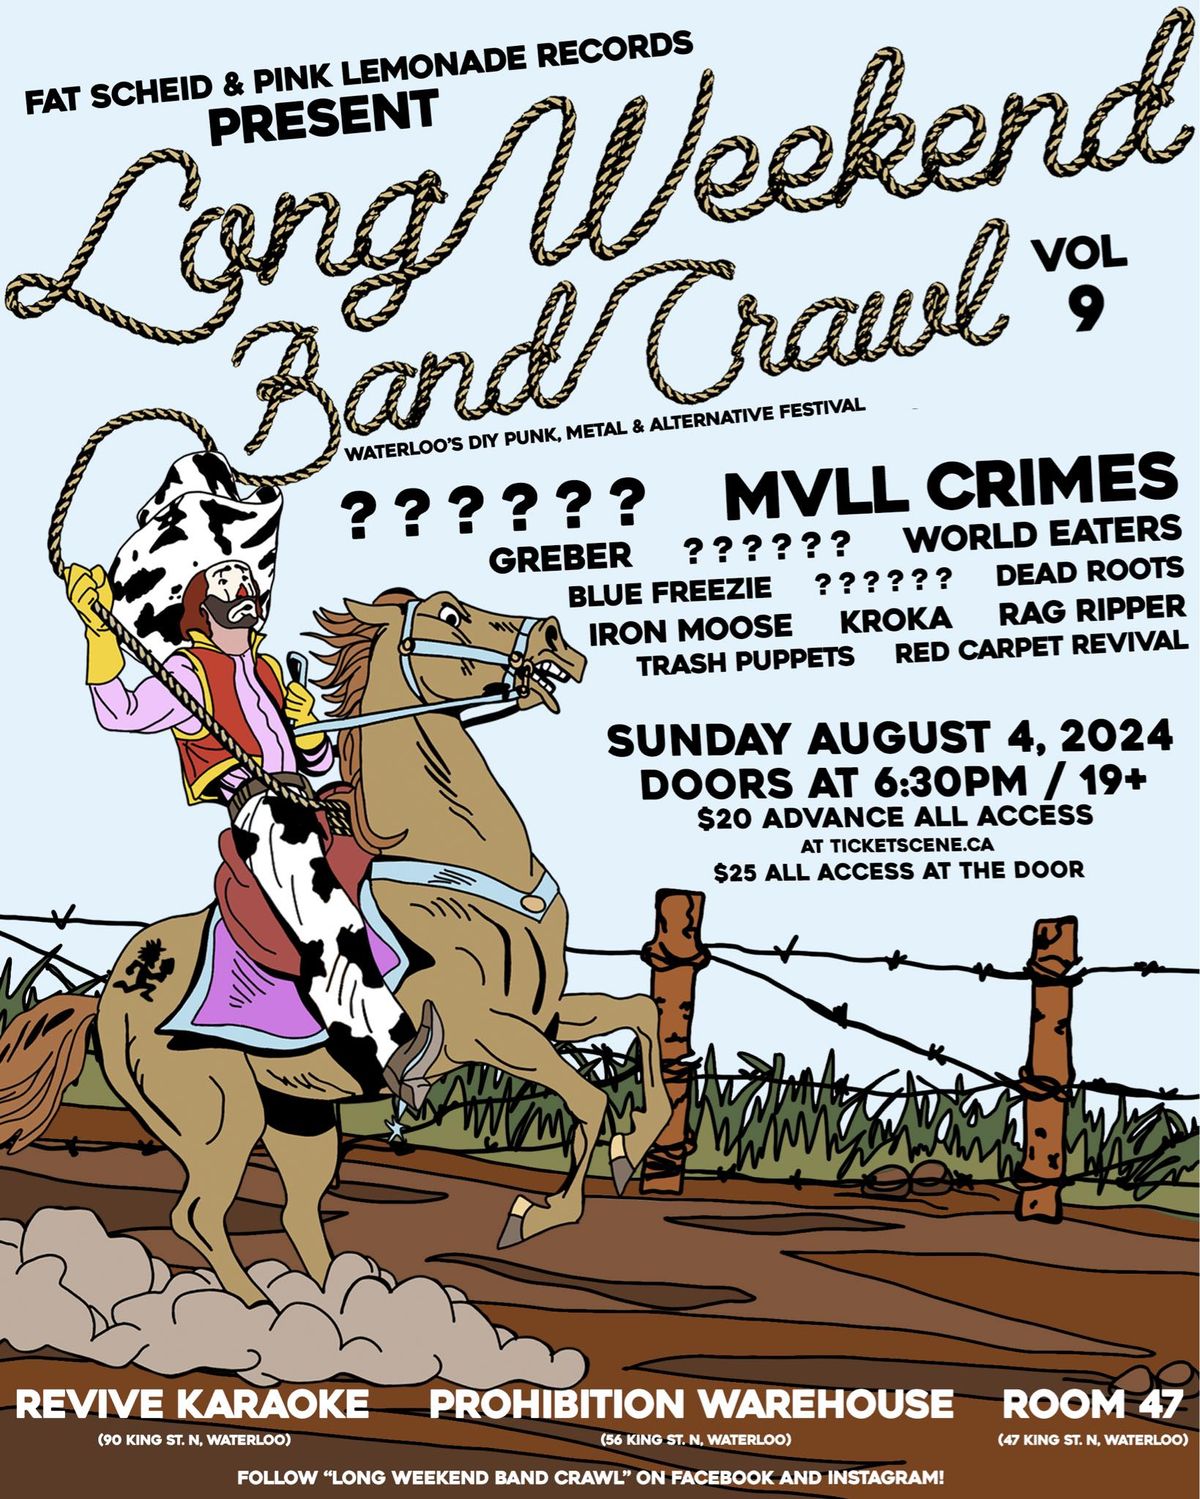 Long Weekend Band Crawl - Sunday, August 4th (Volume 9)